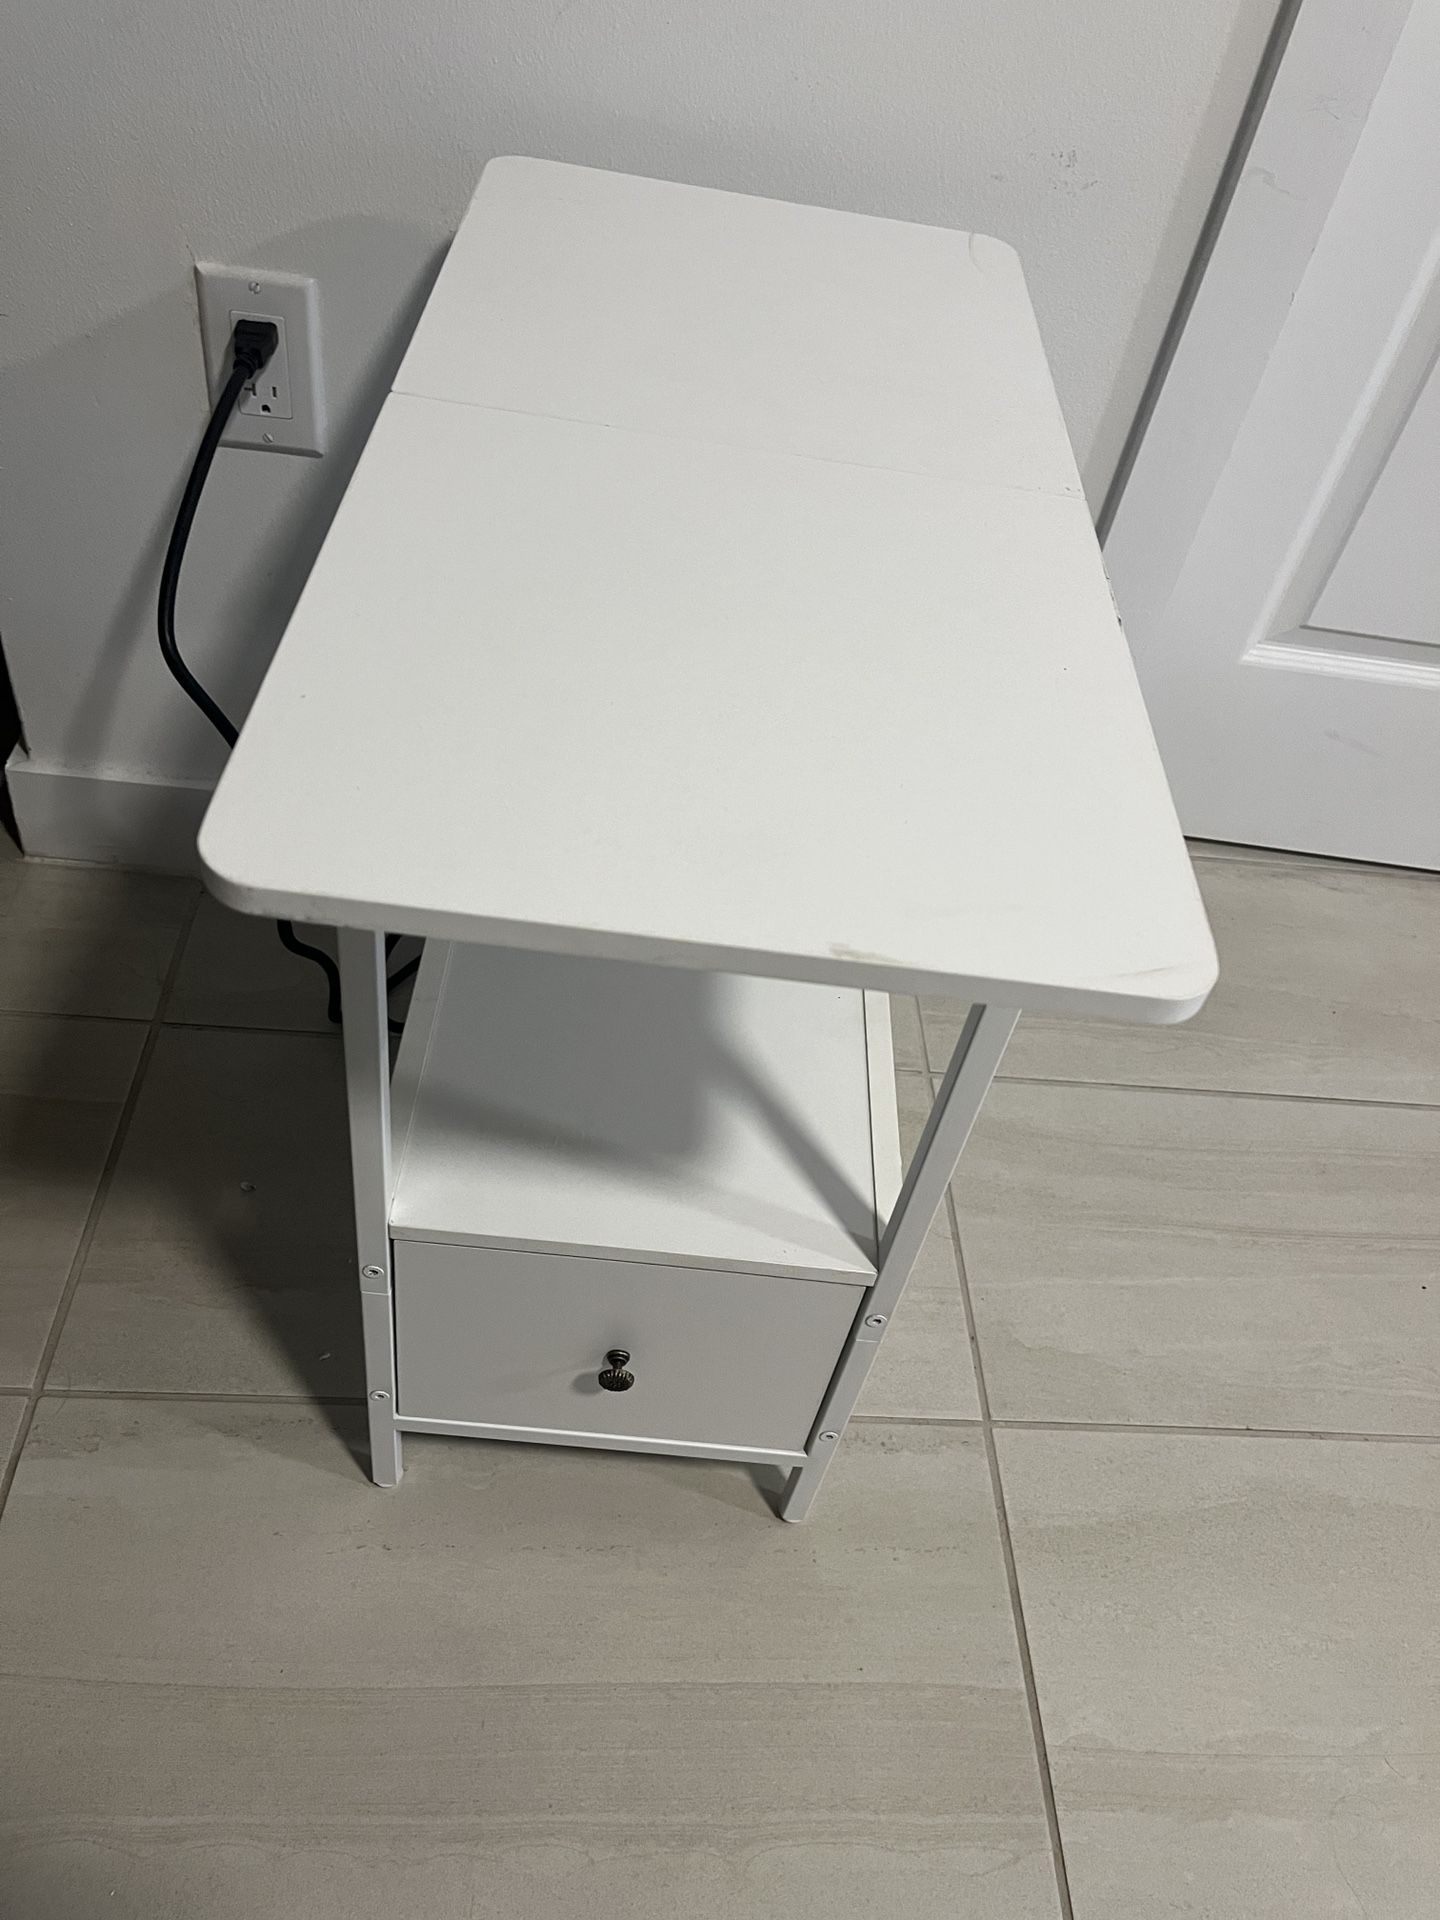 Brand New End Table with Charging Station,USB Ports and Outlets,Nightstand for Small